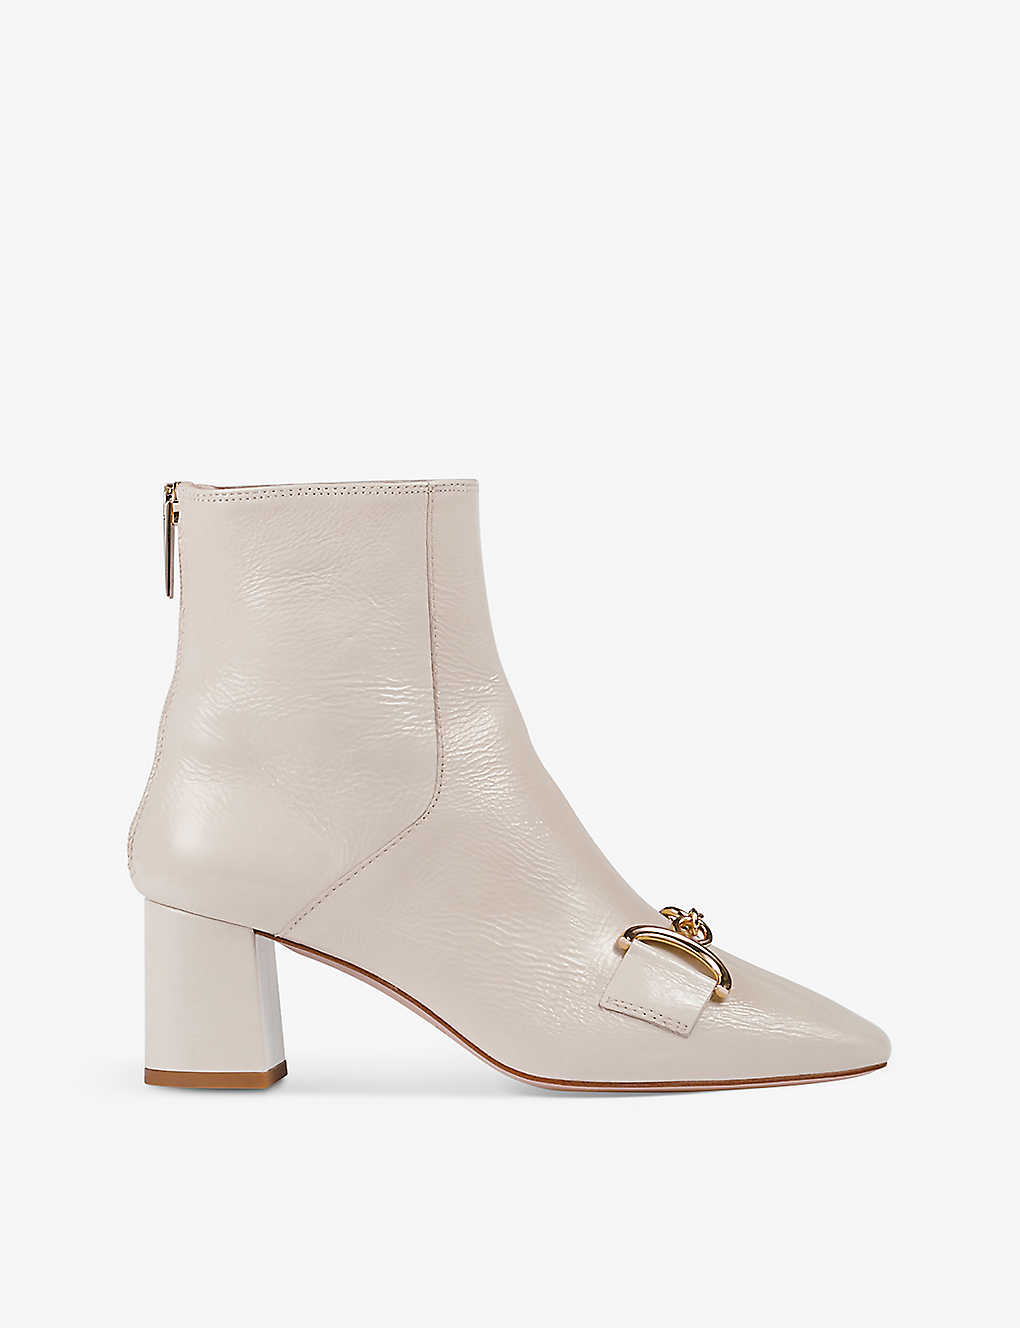 Lk Bennett Womens Cre-ecru Nadina Buckle-embellished Patent-leather Heeled Ankle Boots In Pale Blue